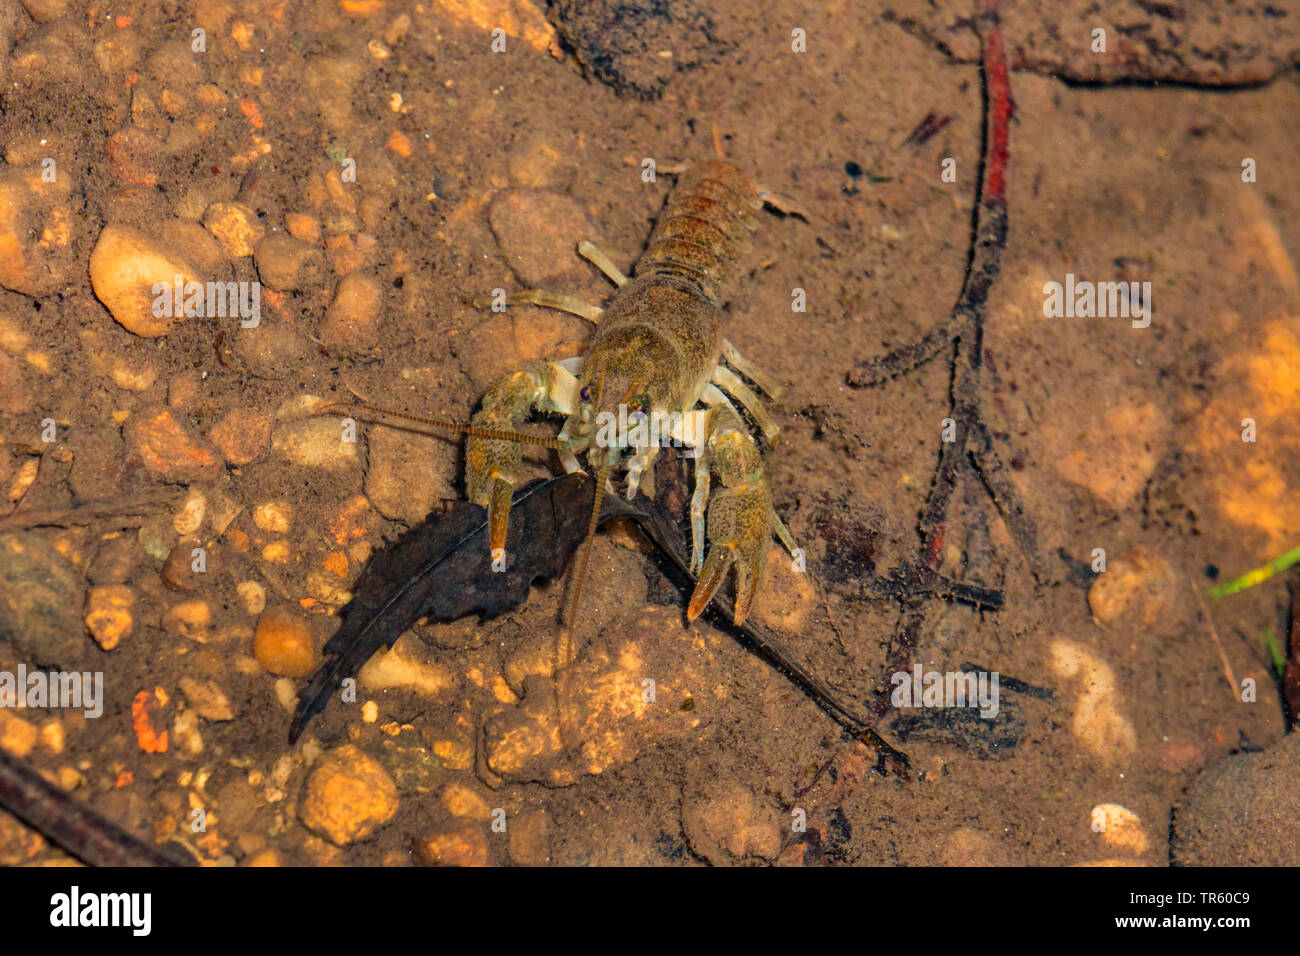 Stone crayfish, Torrent crayfish (Astacus torrentium, Austropotamobius torrentium, Potamobius torrentium, Astacus saxatilis), male in shallow water feeding fallen leaves, view from above, Germany, Bavaria Stock Photo